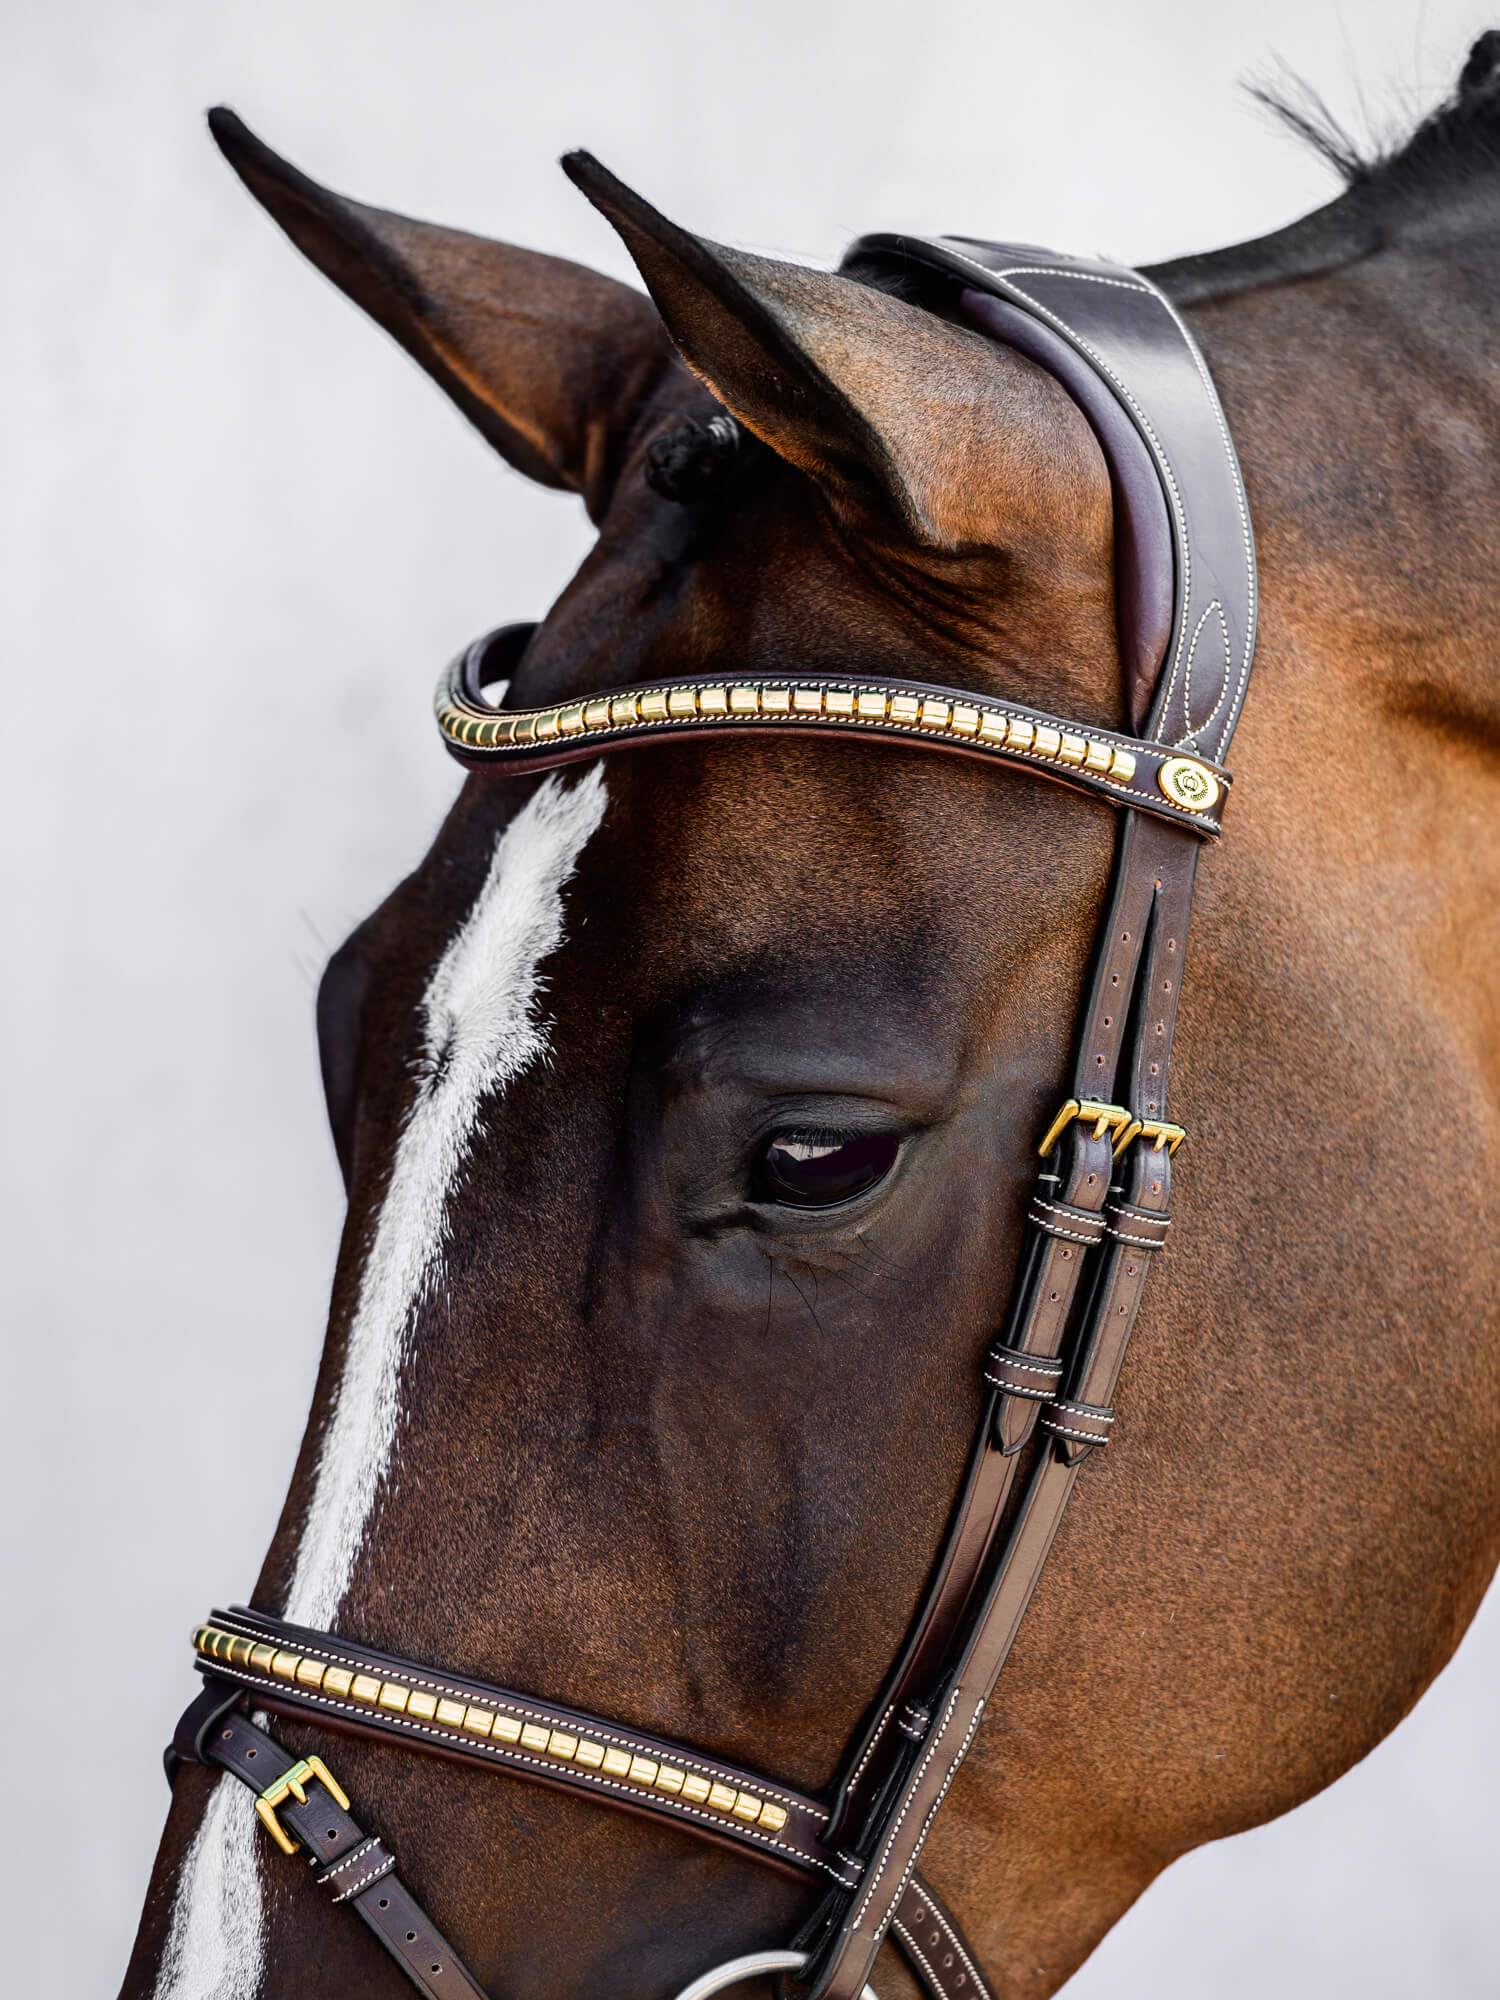 A beautiful snaffle bridle with a removable flash strap and a classical look. It is beautifully decorated with gold-colored clinchers both on the noseband and on the browband.